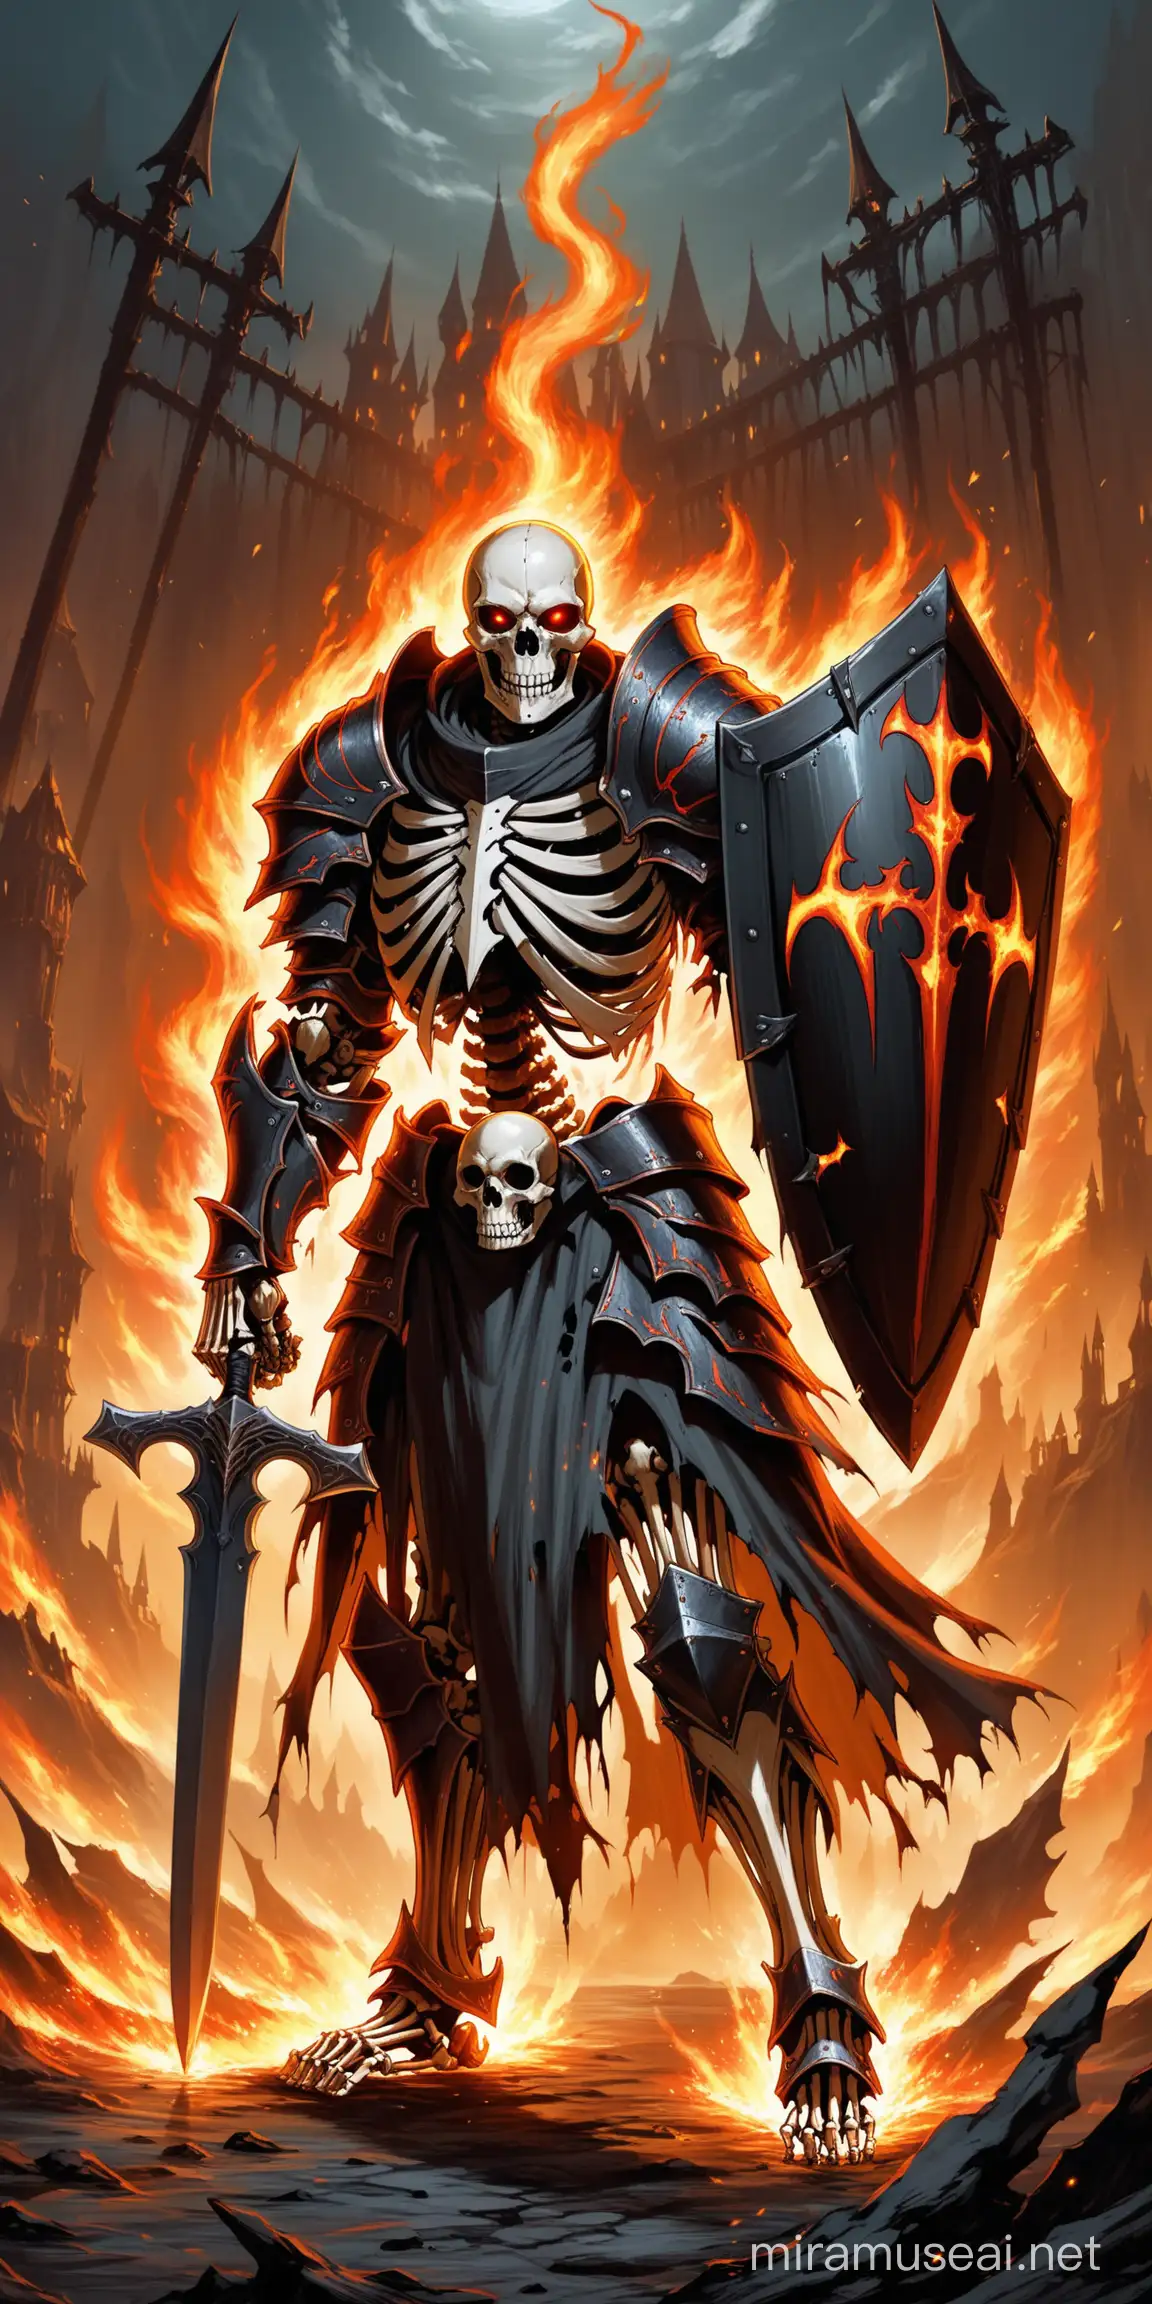 Stalfos Skeleton Knight in Tattered Armor with Blade and Shield